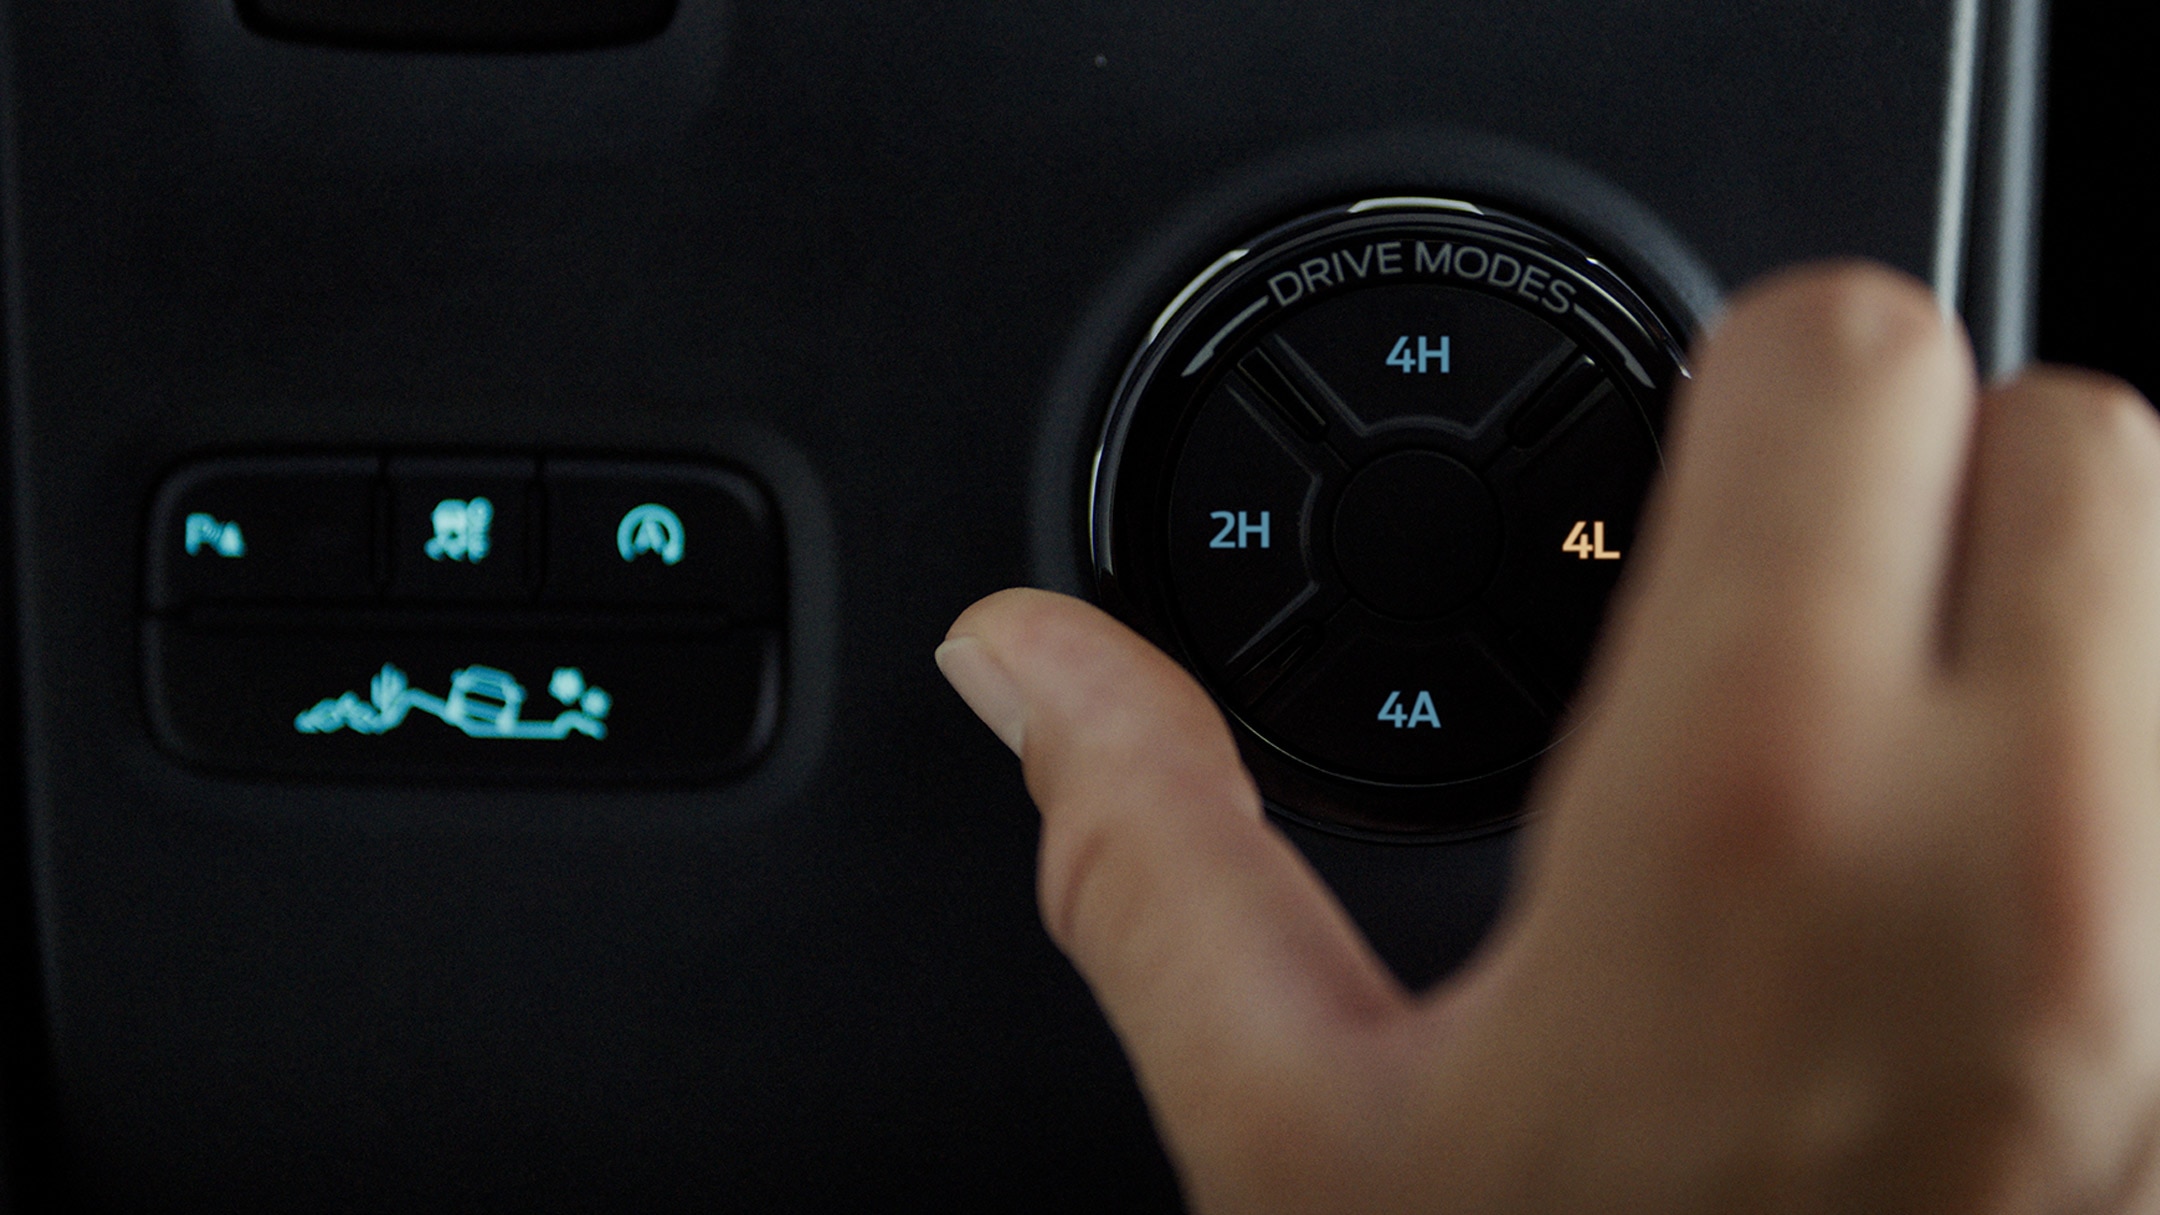 All-New Ford Ranger Raptor Drive Modes button detail